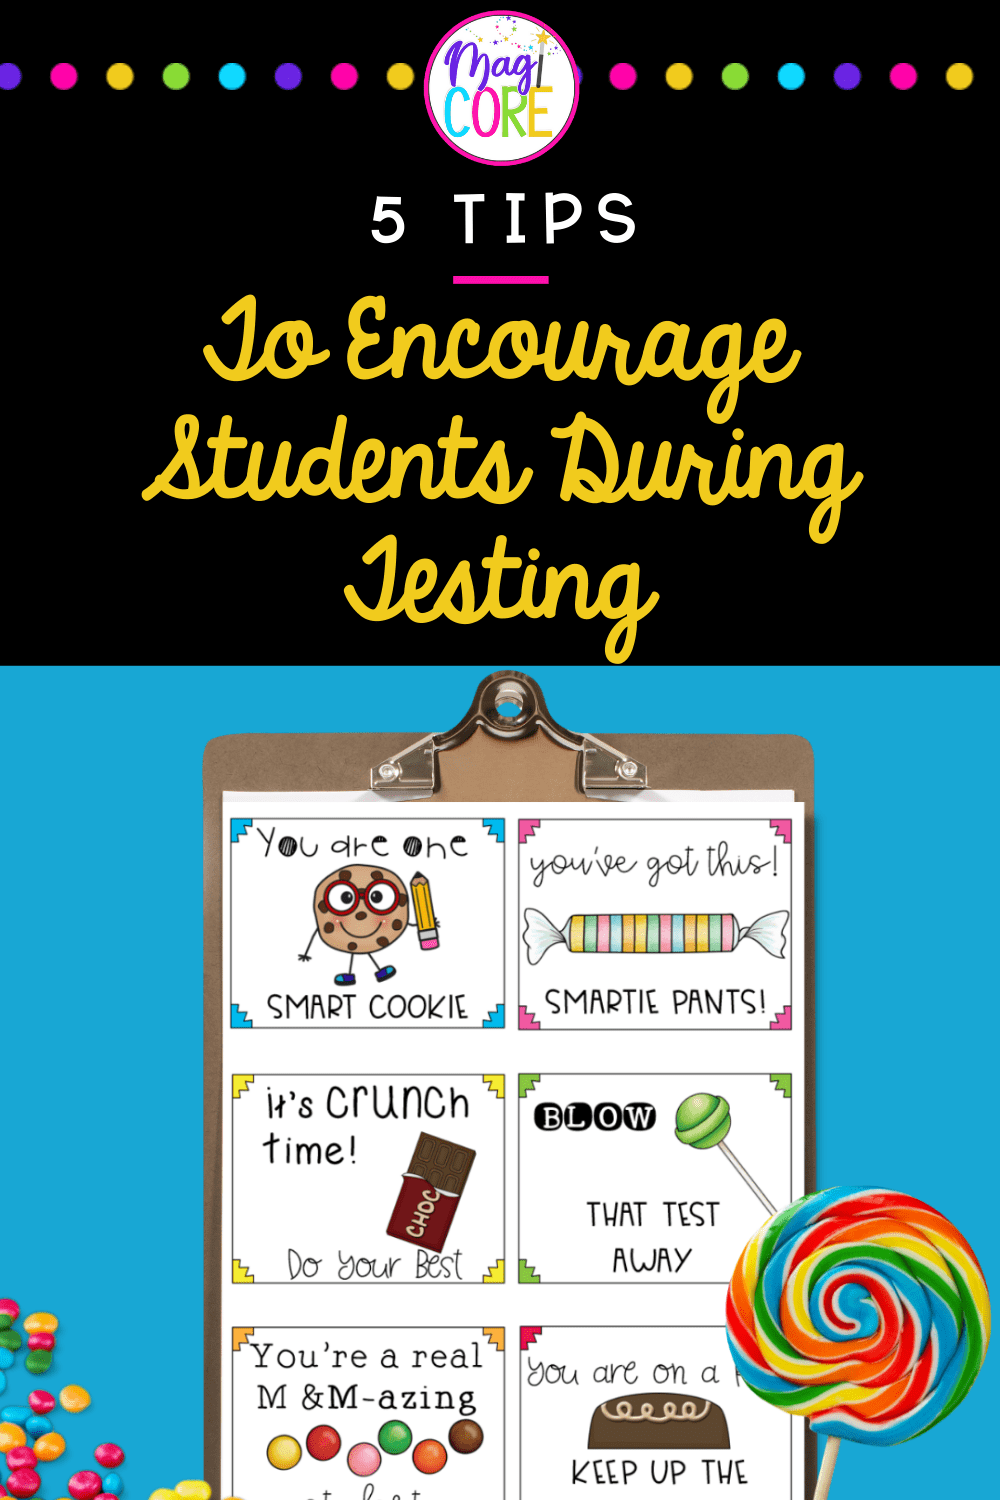 Tips to Encourage Students during Testing